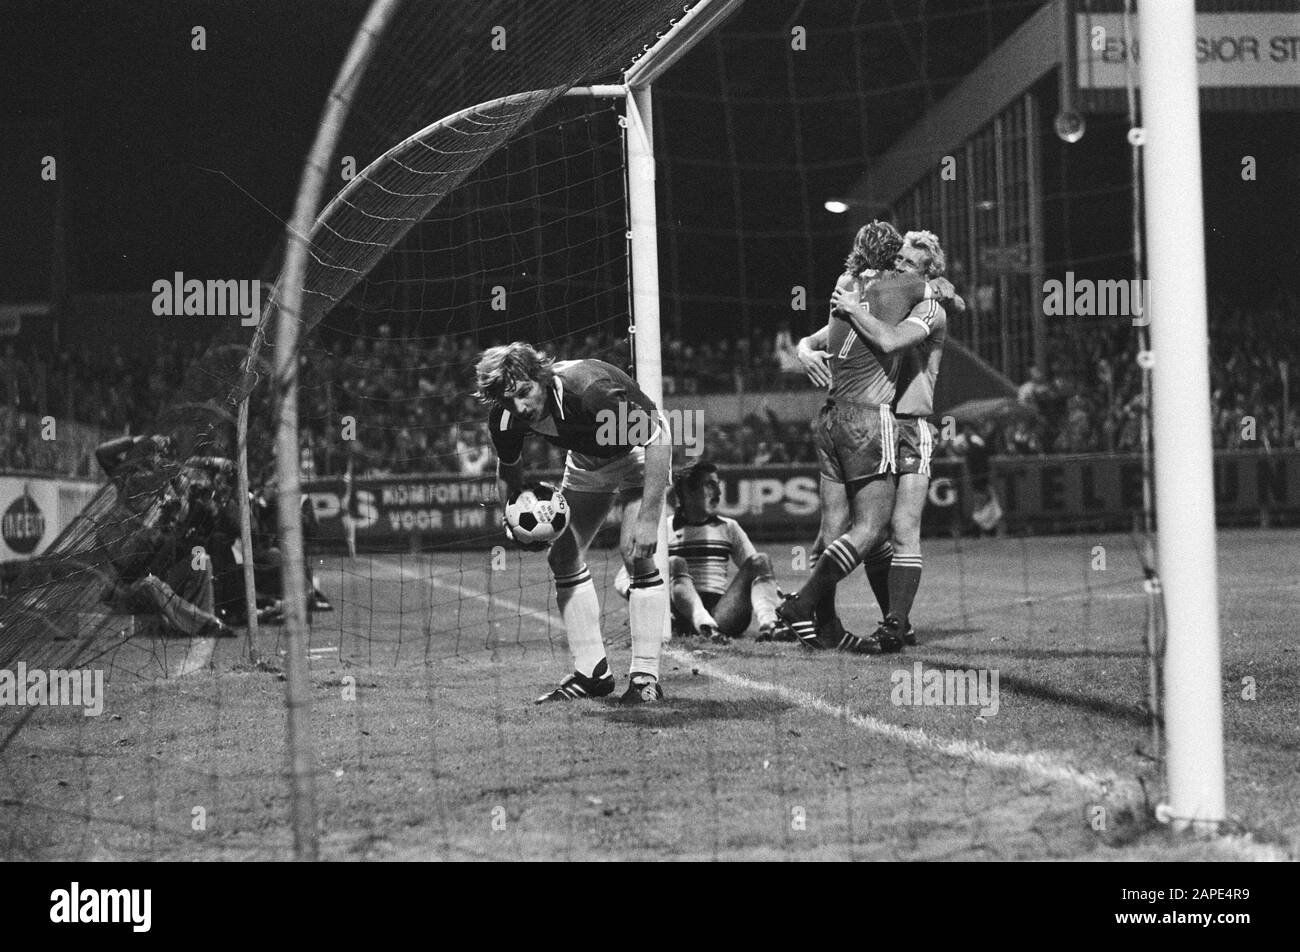 AZ67 against Red Boys (Luxemburg) UEFA-cup, Nijgaard (7) has 3-0 scored hugged by Chest, (sitting) and Scholts takes ball from goal Date: September 14, 1977 Location: Luxembourg Keywords: Sport, football Institution name: Red Boys Differdingen Stock Photo